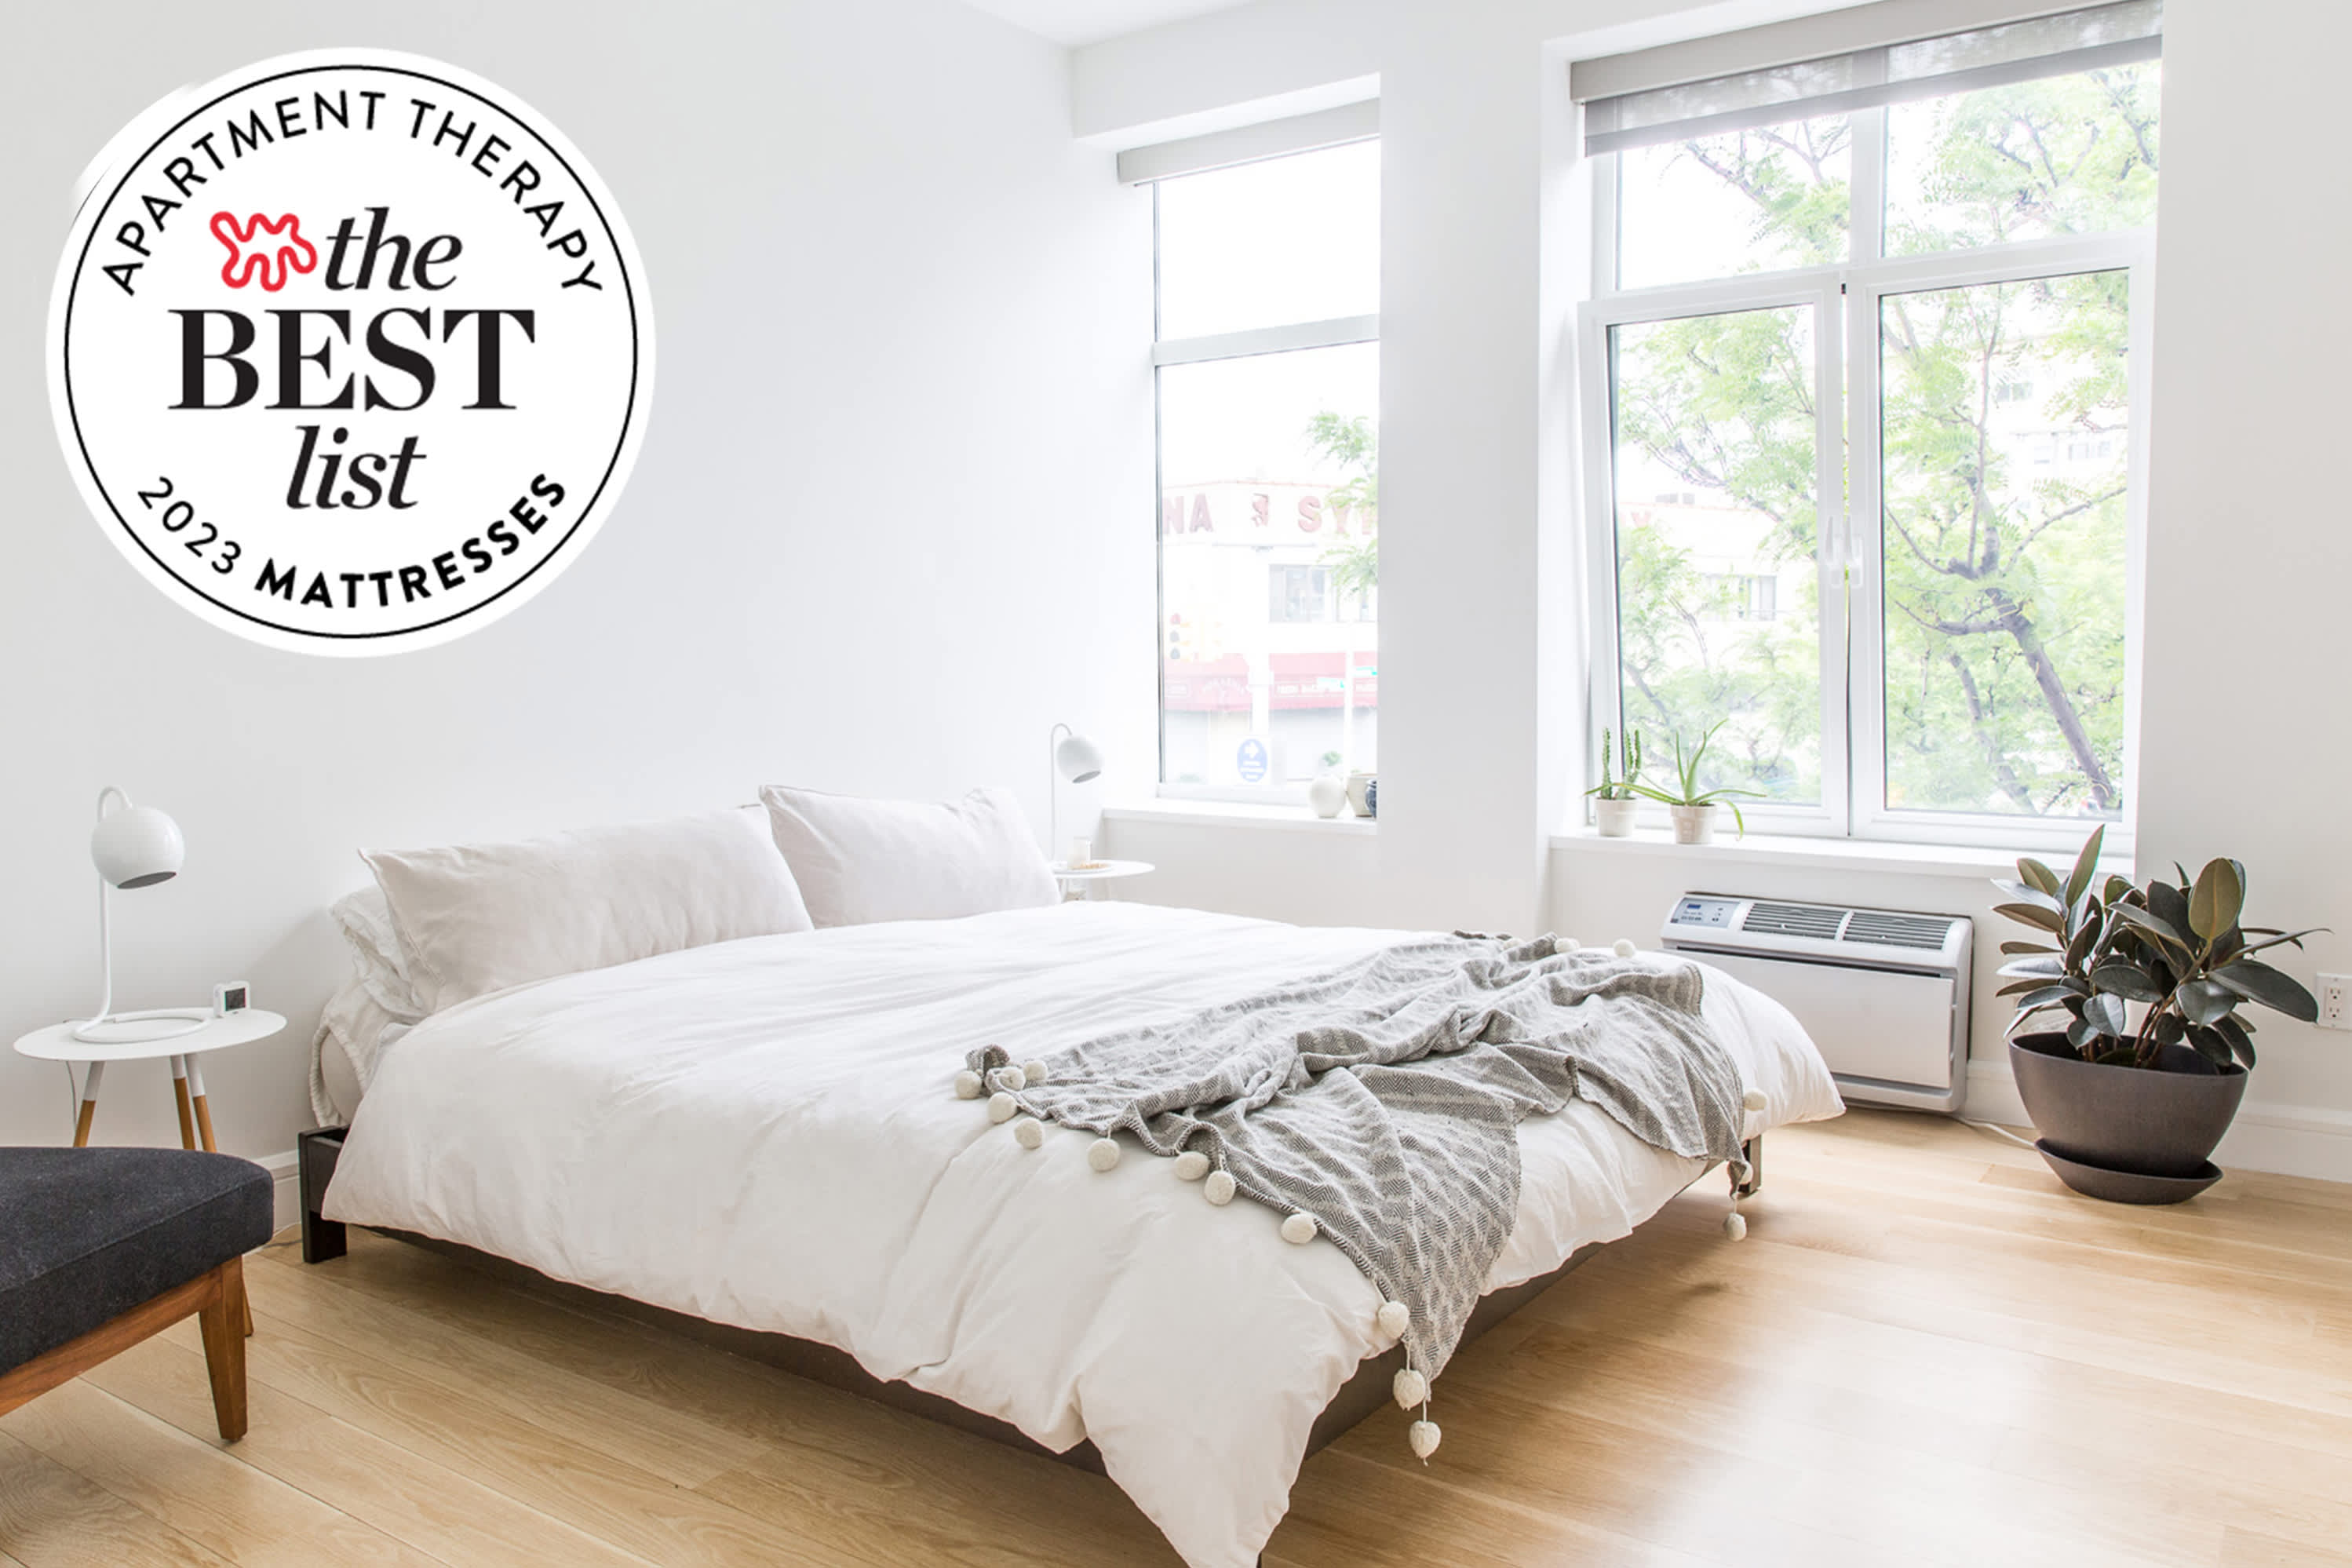 What Are the Best Bedding Materials? Speedy Speaks « Daily Bulletin